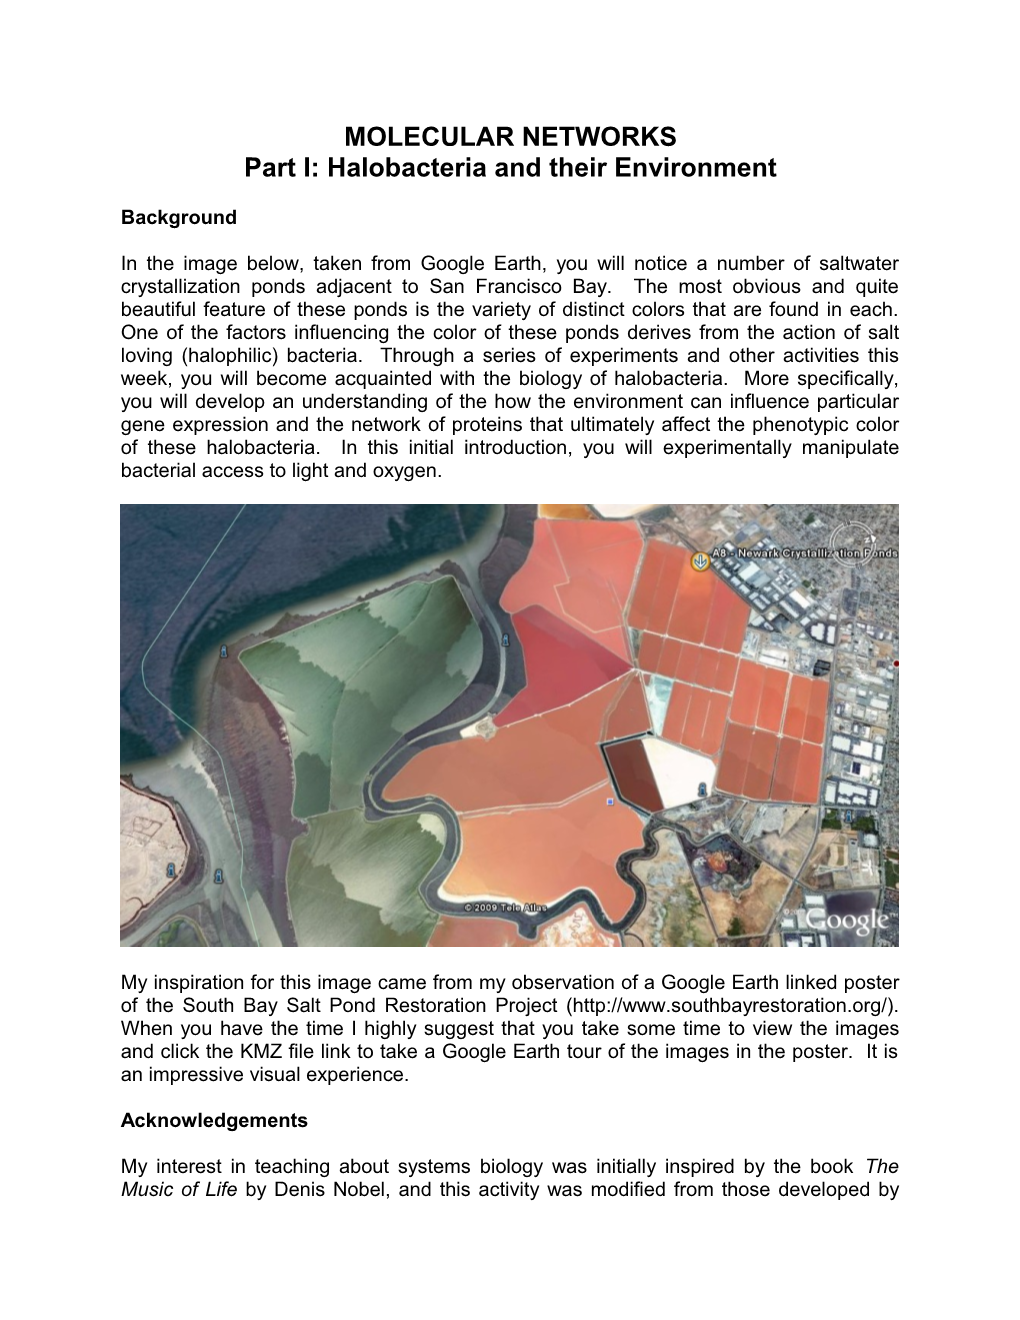 Part I: Halobacteria and Their Environment